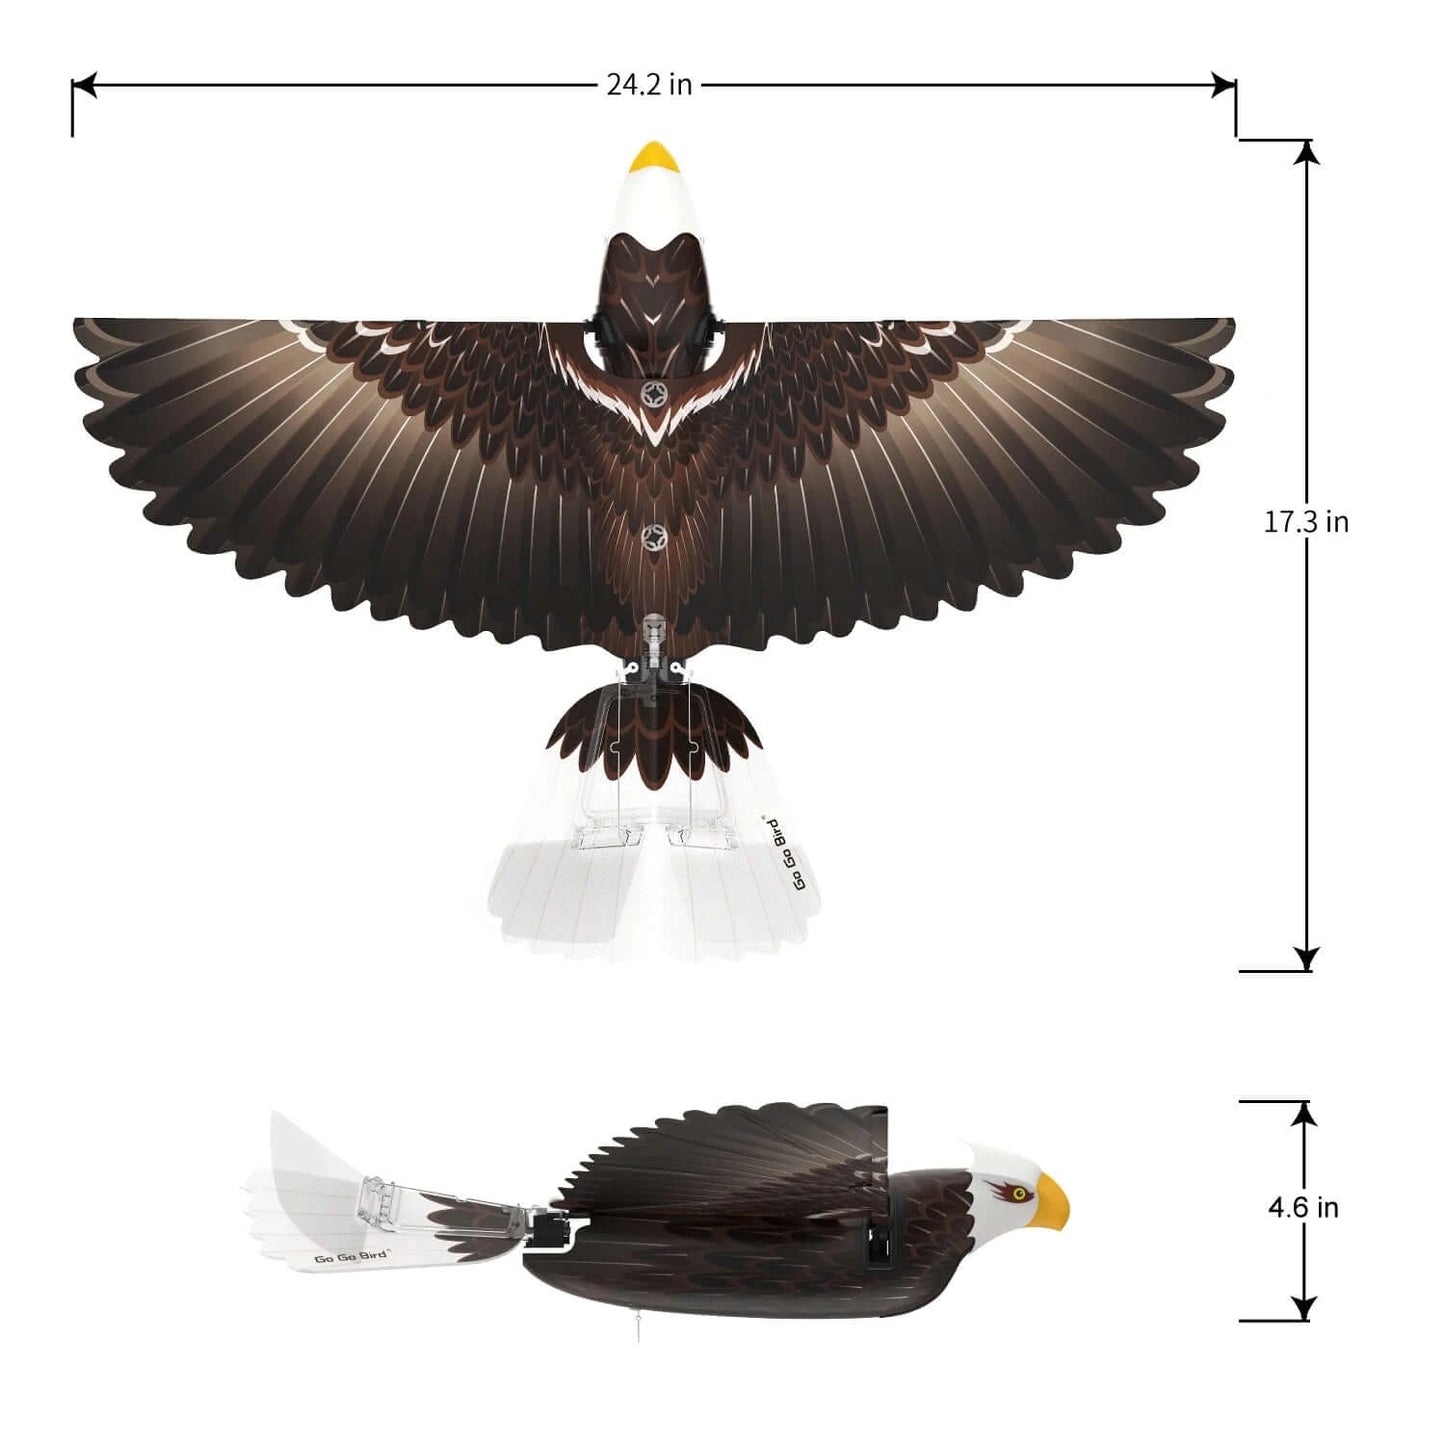 Go Go Bird Eagle: Upgraded RC Flying Eagle with Smart Bionic Flapping Wings | Kids Toy Lover